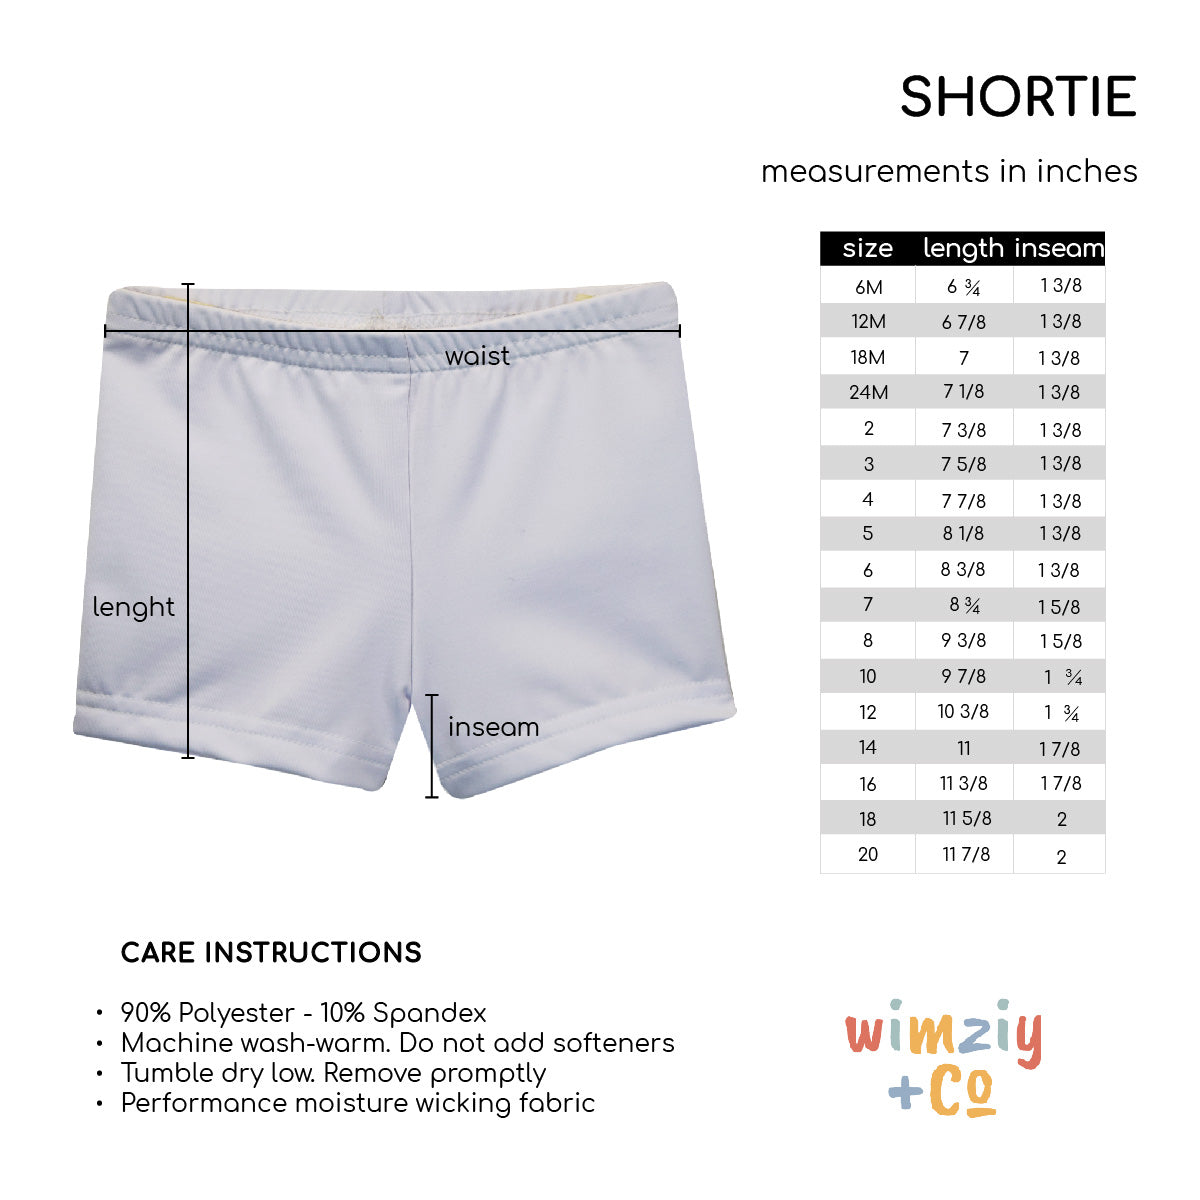 Cheer Gold and Black Shorties - Wimziy&Co.